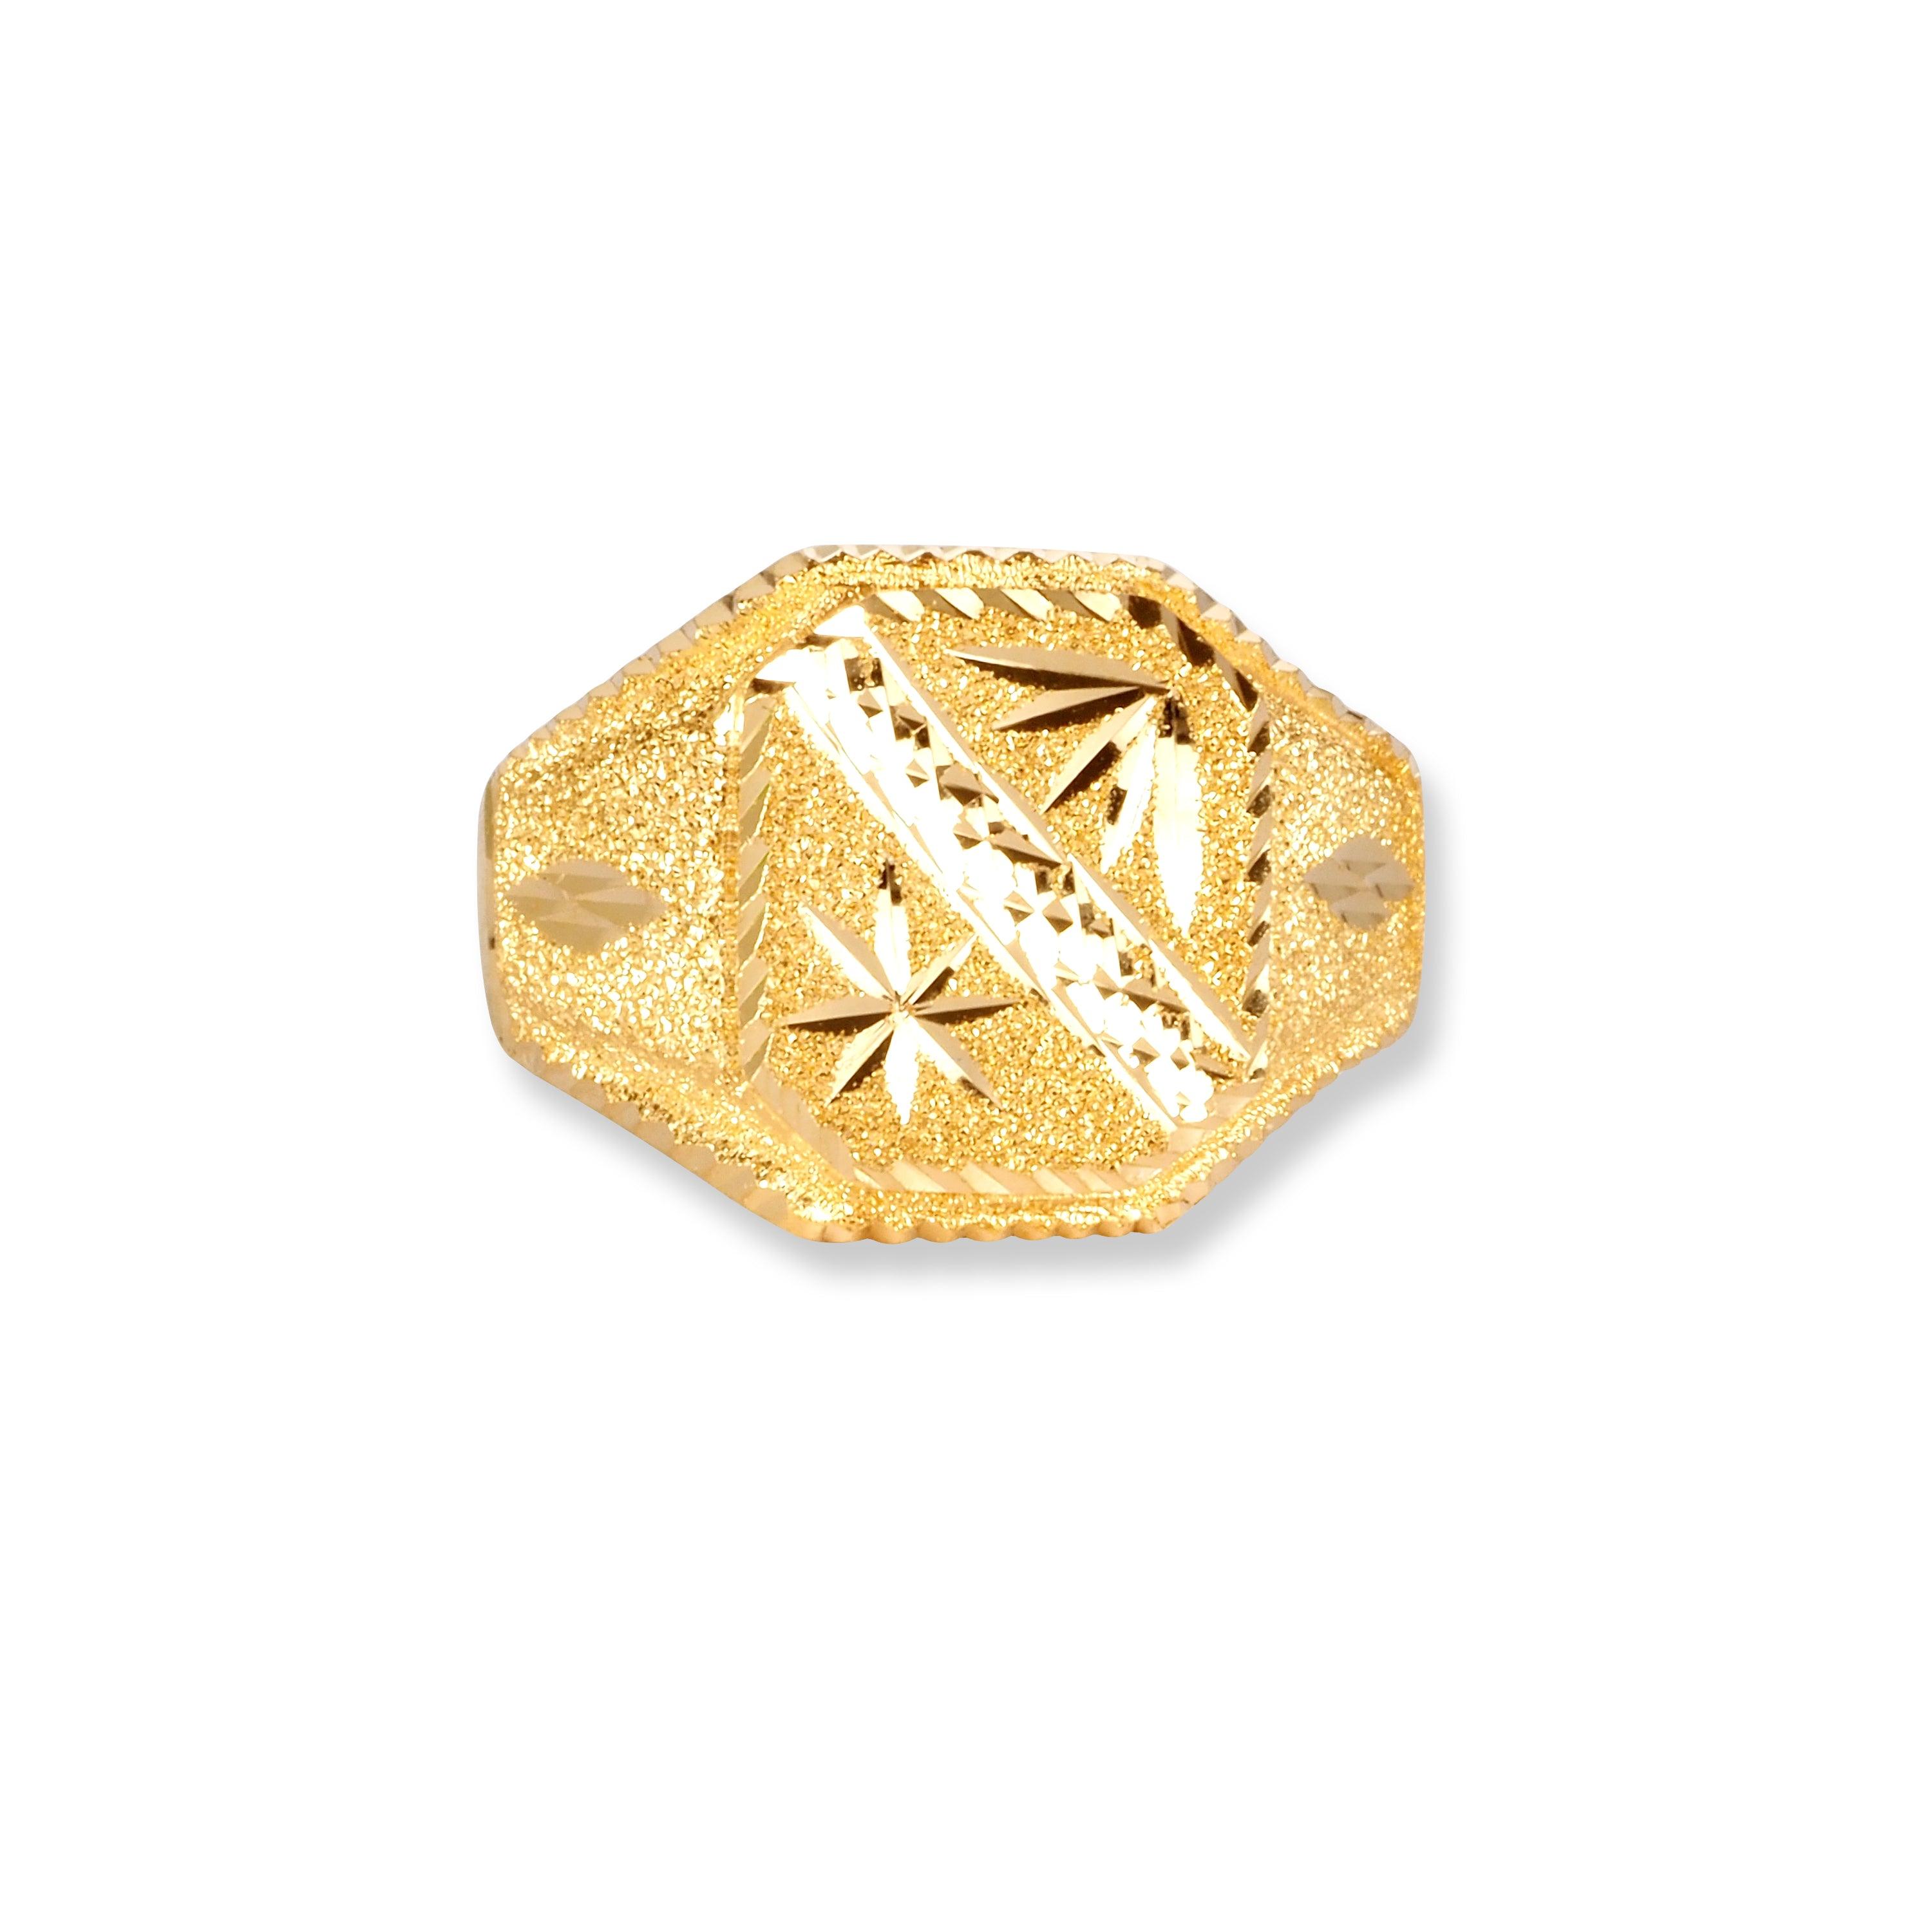 22ct Gold Gents Signet Ring GR-8319 - Minar Jewellers